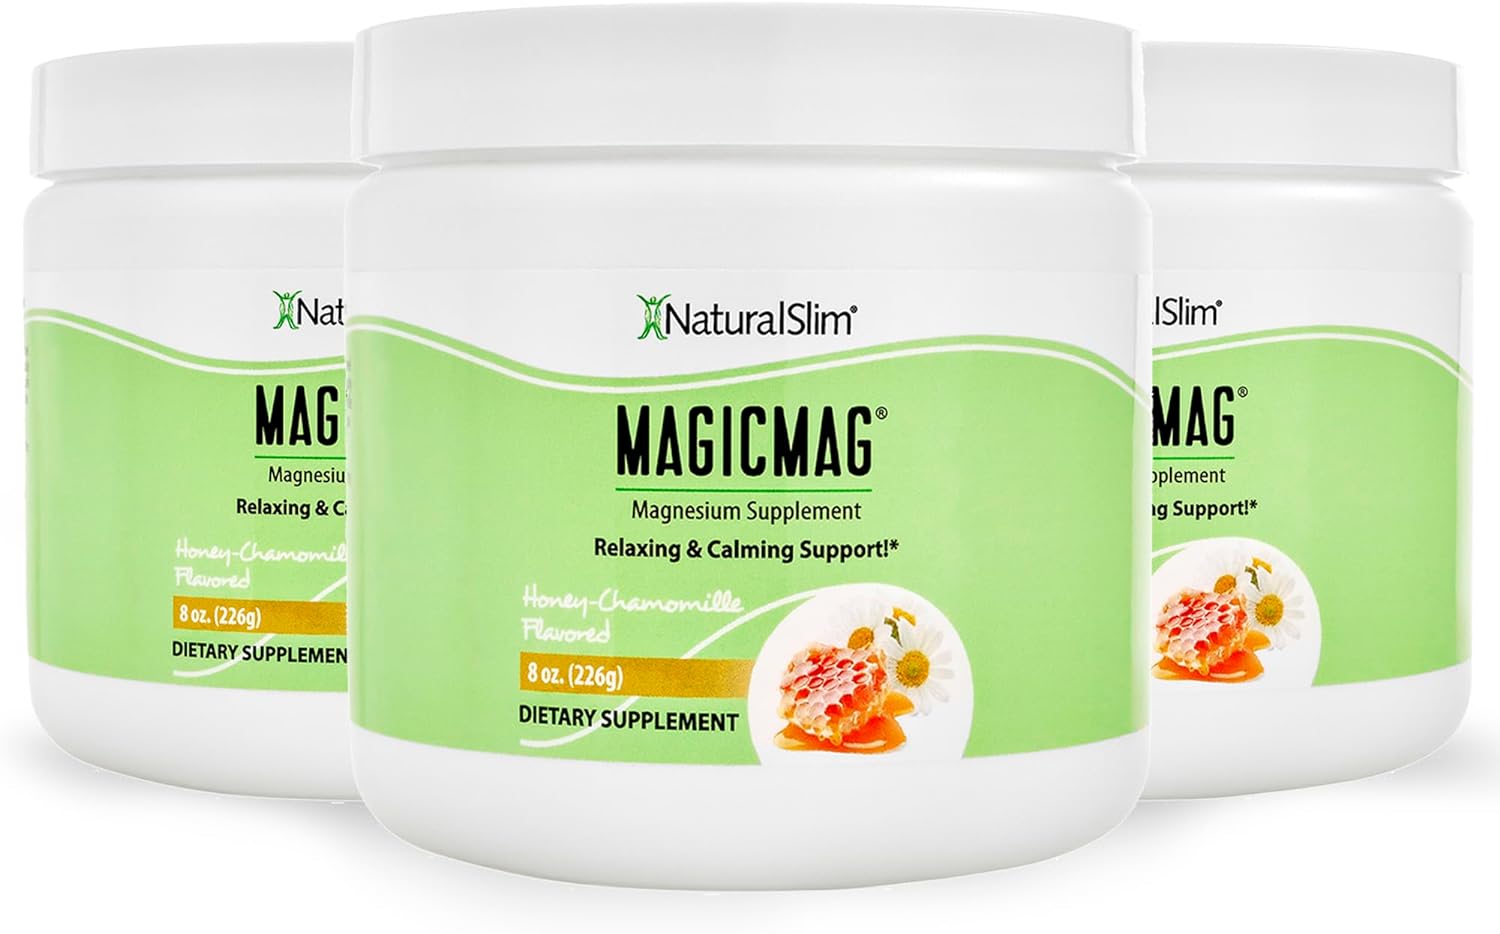 NaturalSlim Magicmag Pure Magnesium Citrate Powder Stress, Constipation, Muscle, Heart Health, and Sleep Support | Honey Chamomile Flavored Magnesium Supplement - 8oz Drink Mix (3 Pack)